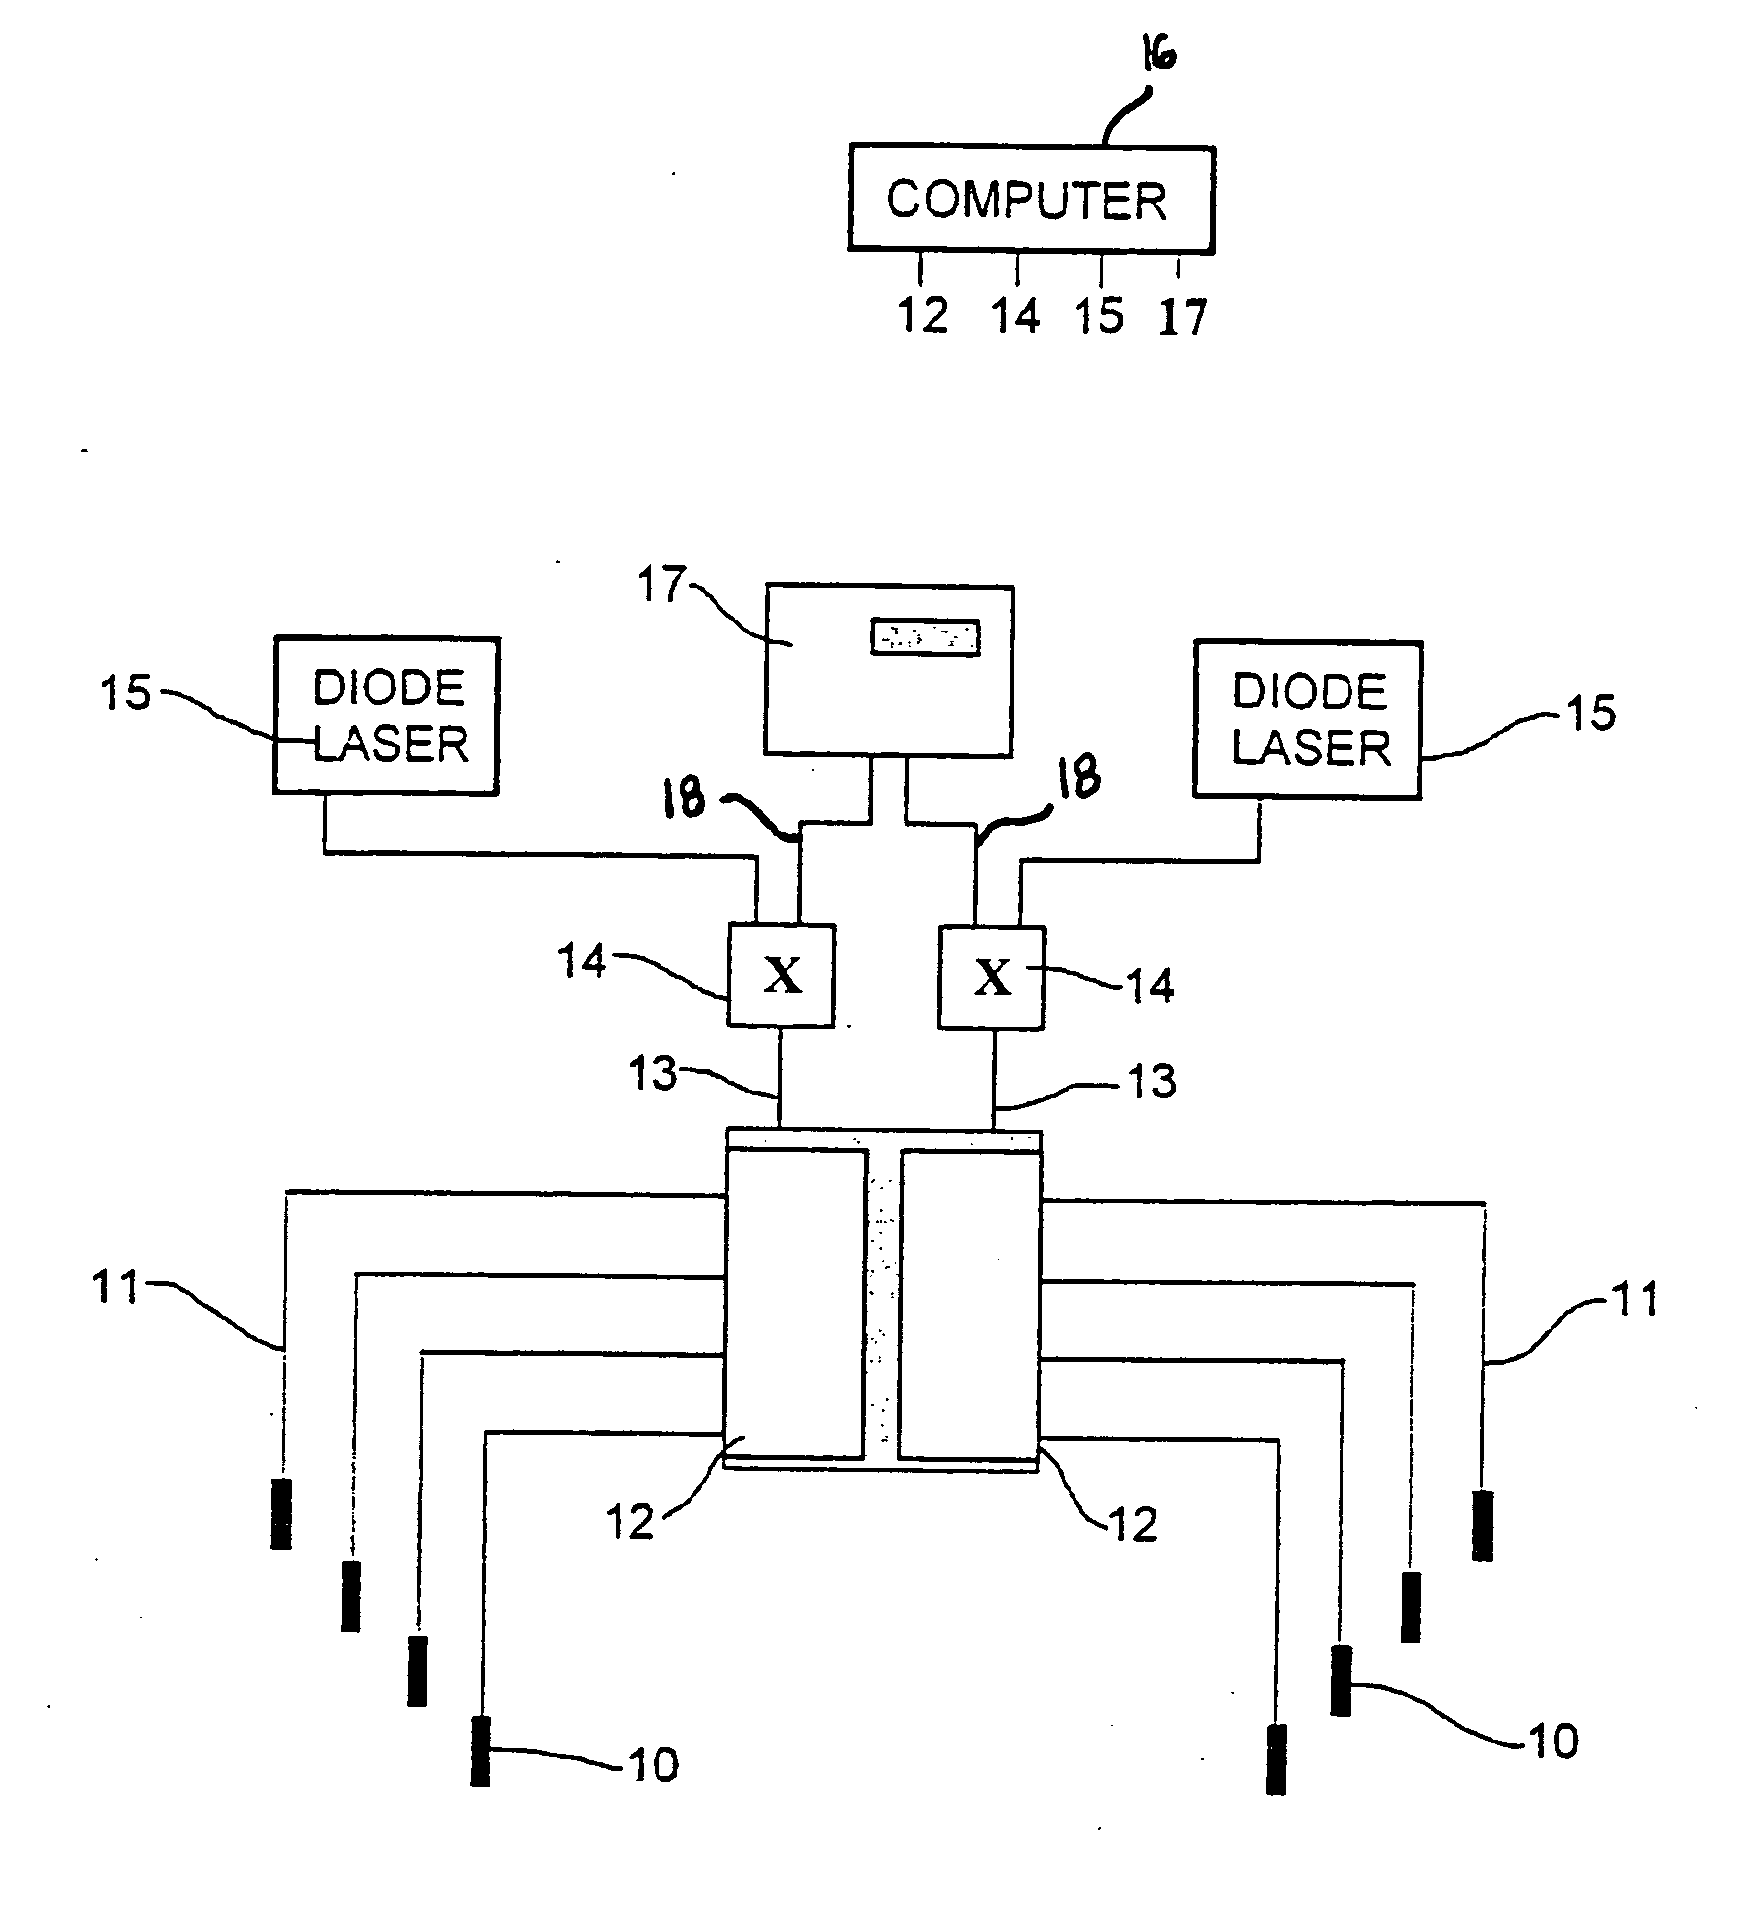 Switched photodynamic therapy apparatus and method